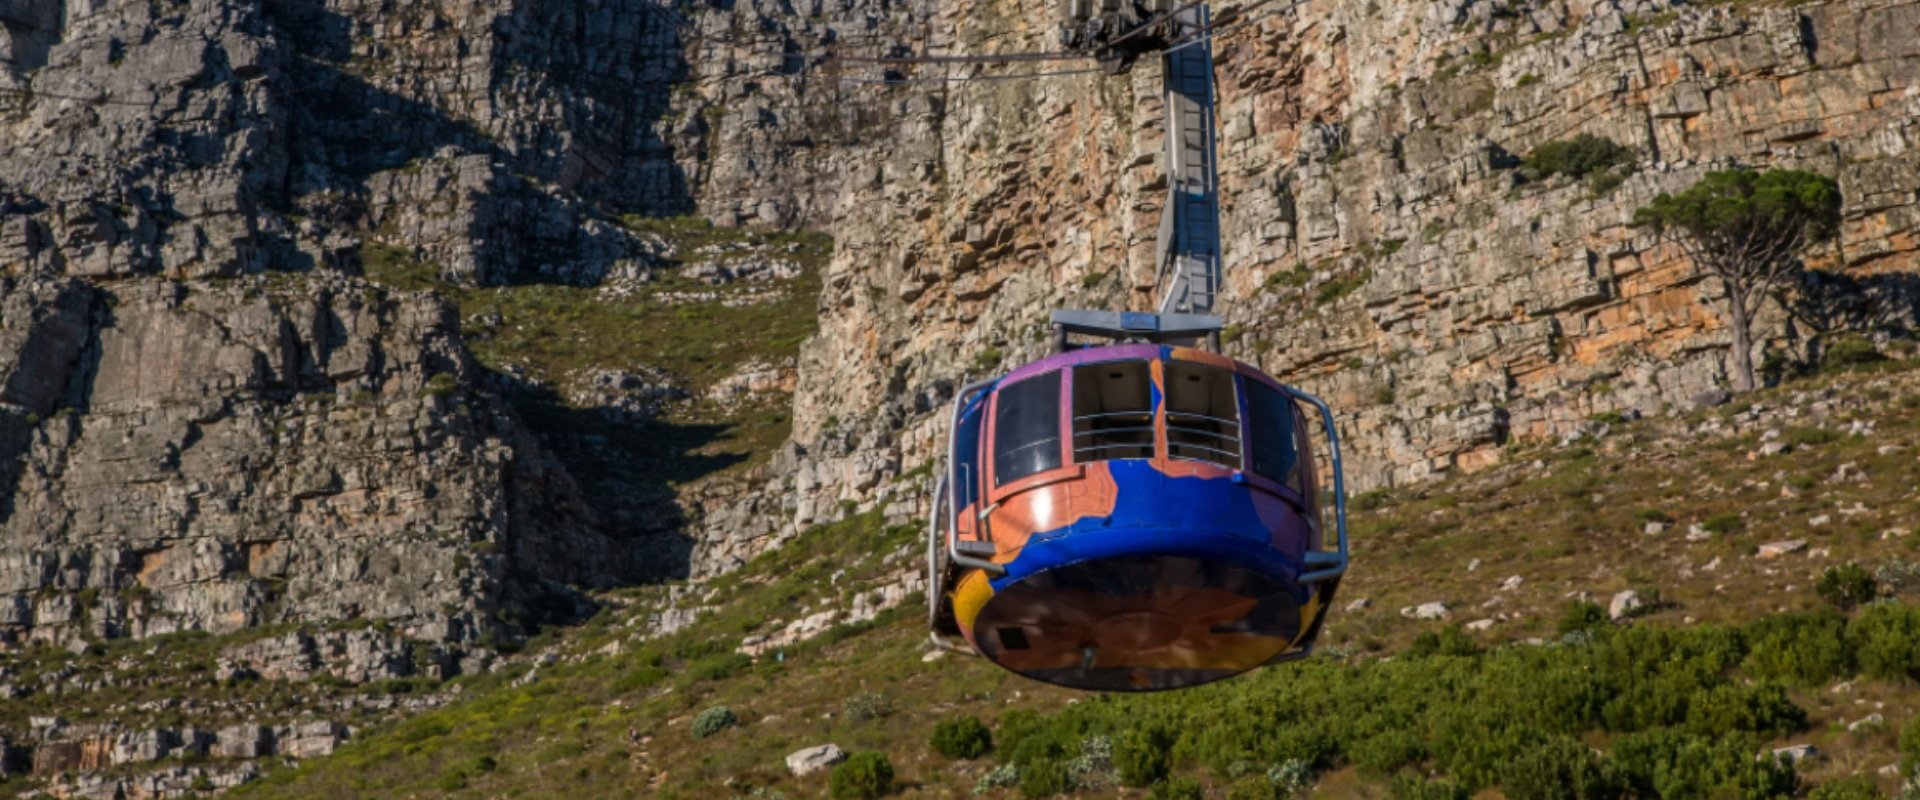 Take in breathtaking views of Table Mountain from cableway